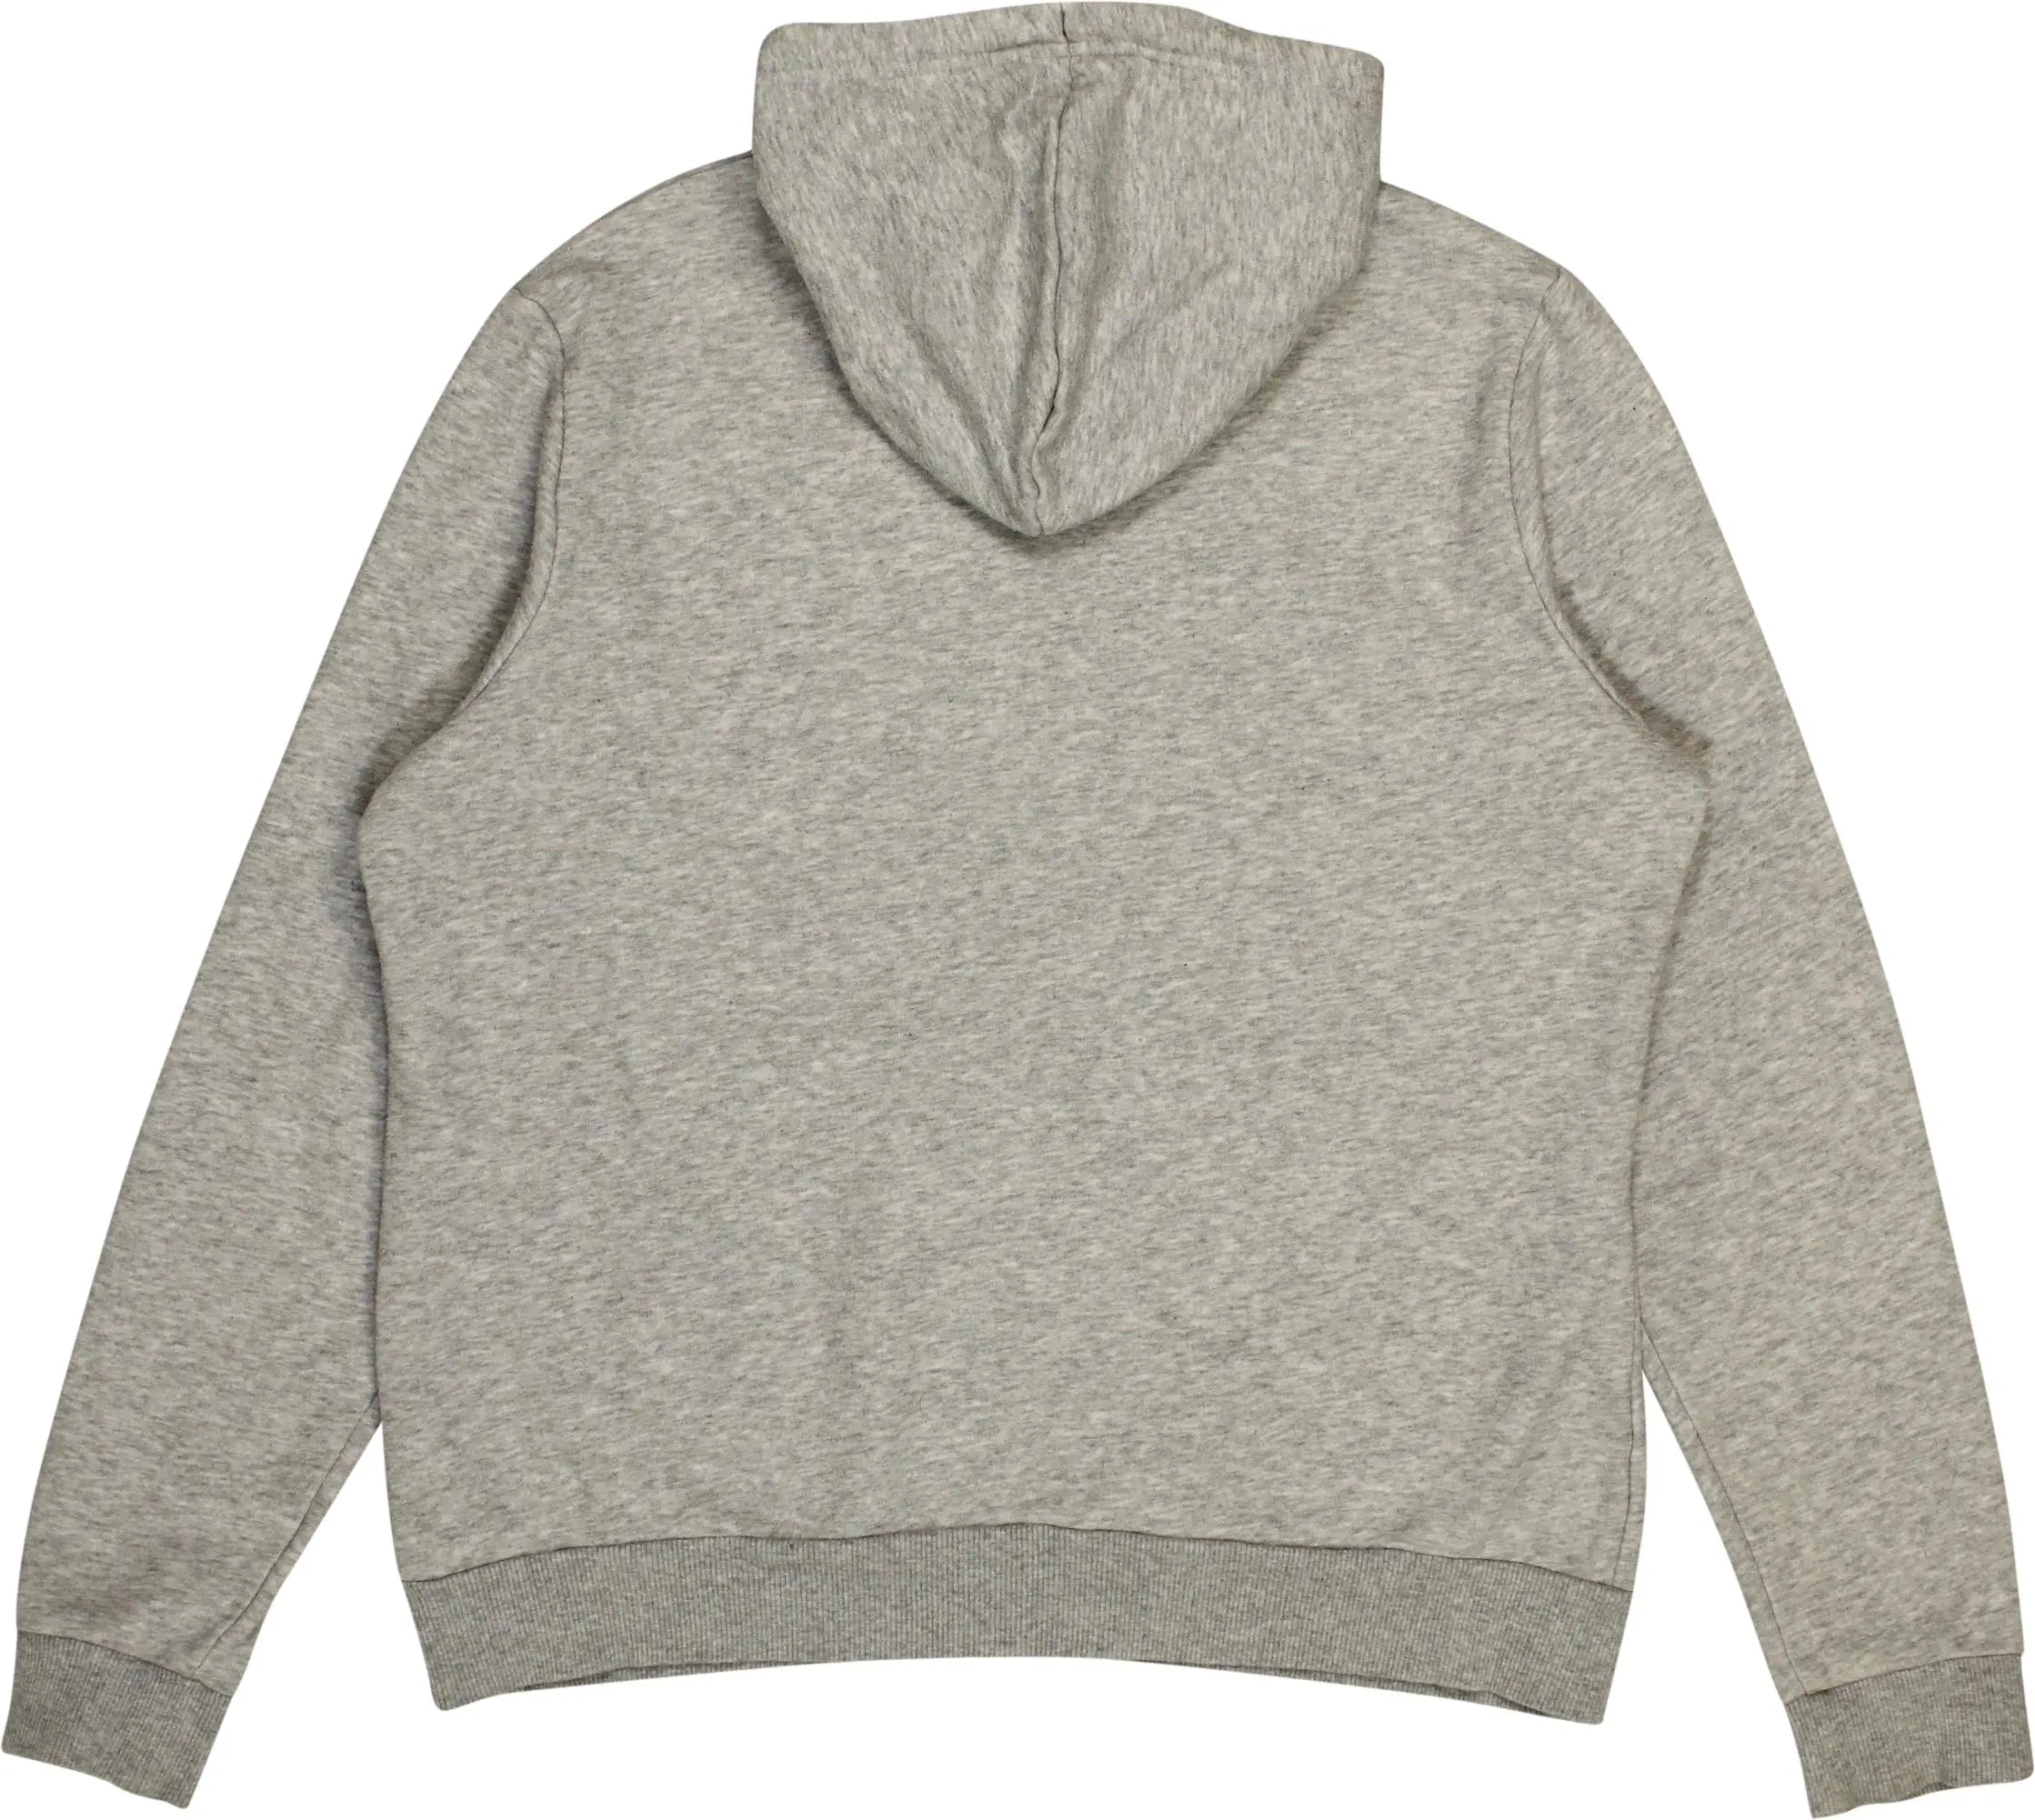 Puma - Grey Hoodie by Puma- ThriftTale.com - Vintage and second handclothing